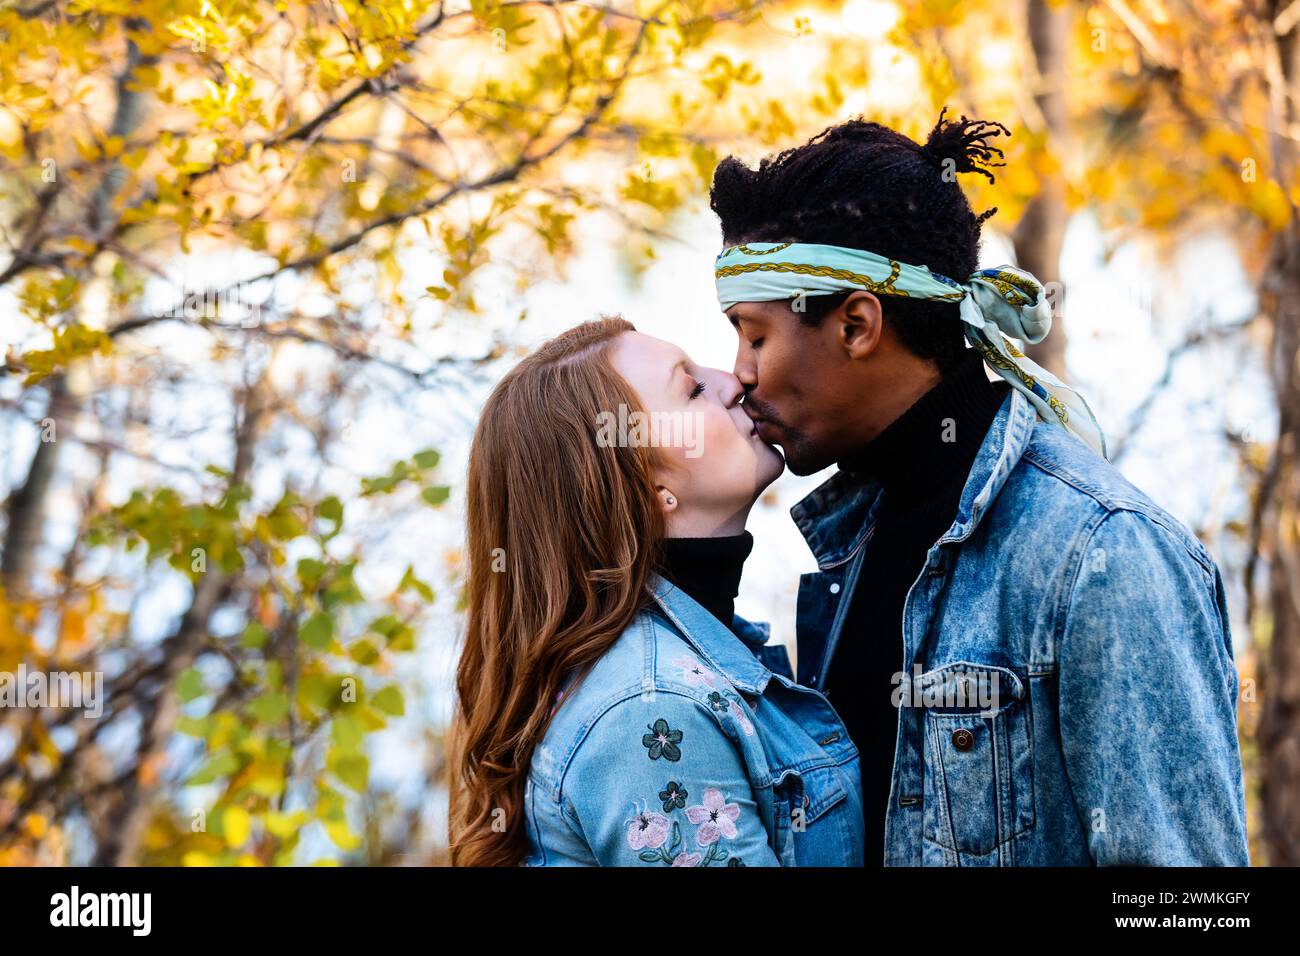 Close-up of a mixed race married couple kissing each other during a fall family outing in a city park, spending quality time together Stock Photo